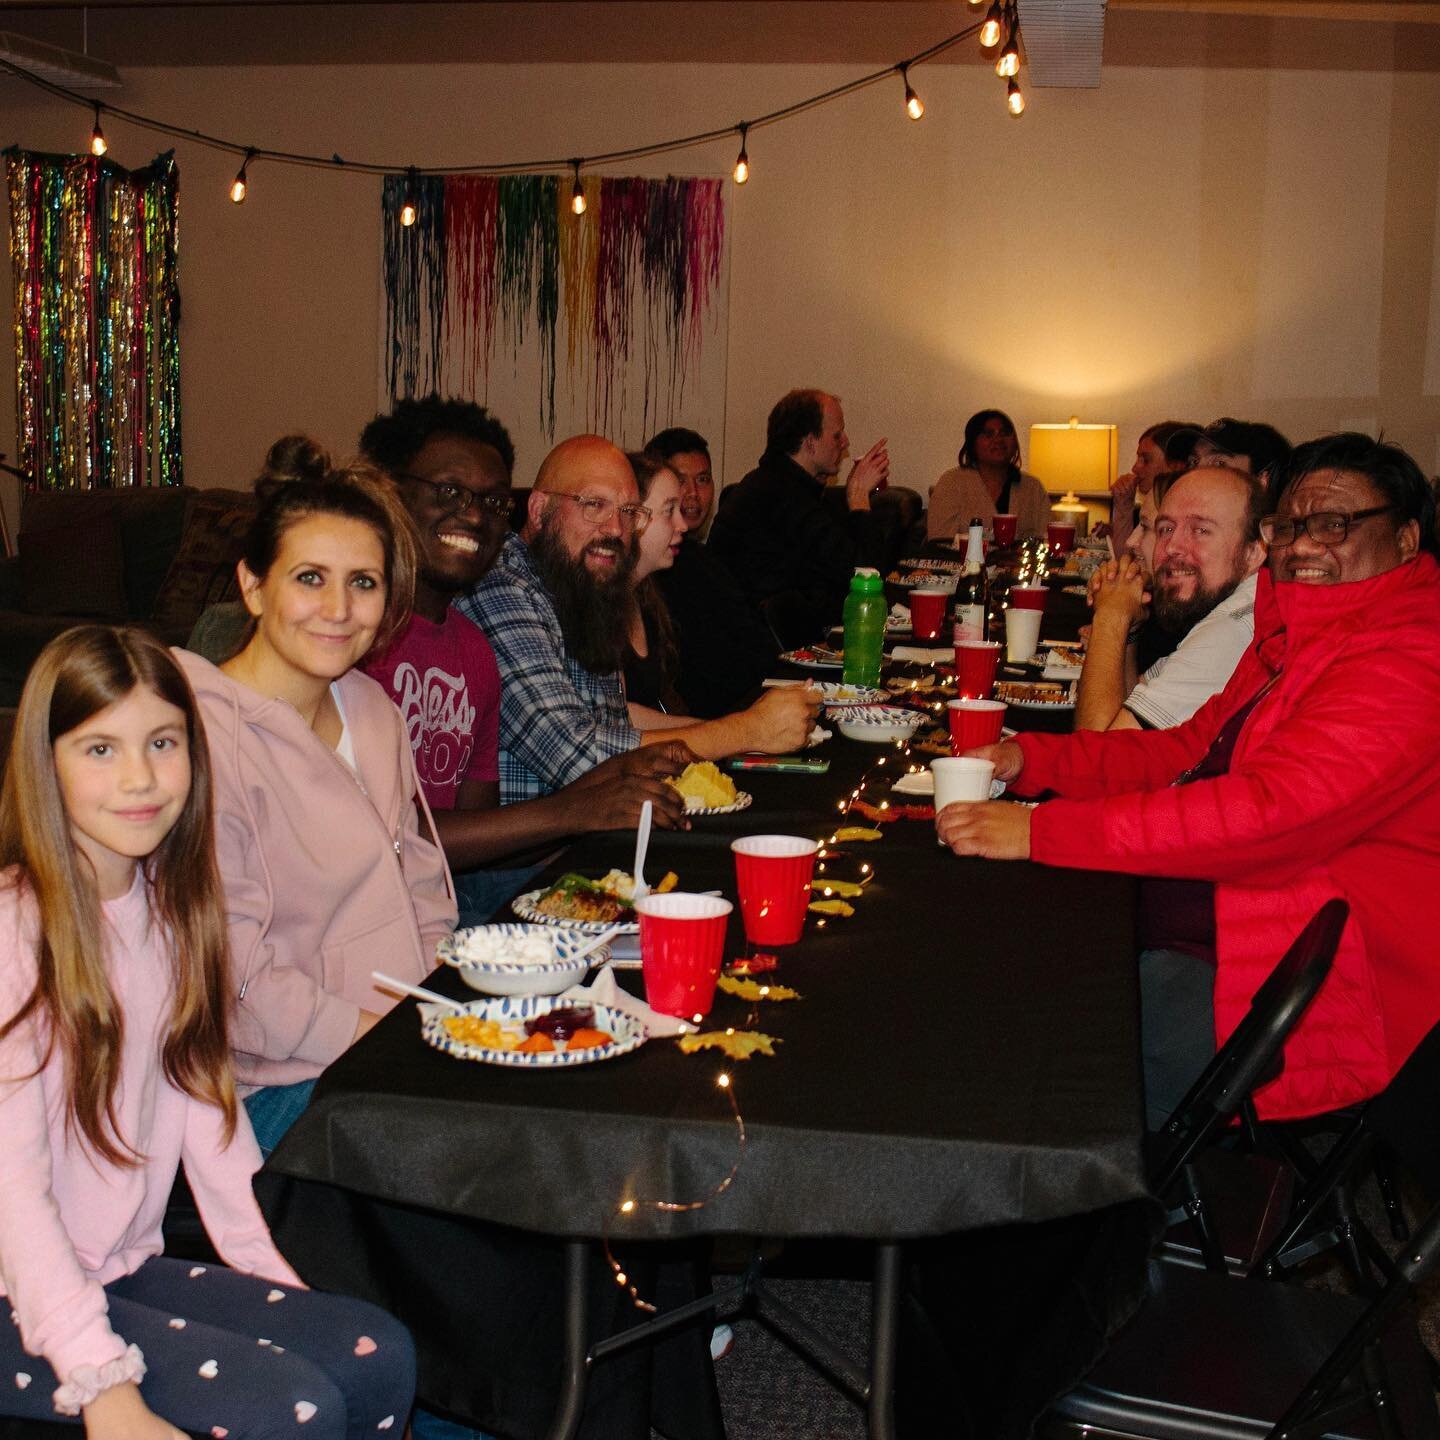 It&rsquo;s giving&hellip;friends! ✨ We are so thankful for the opportunity we had to feast on some good food and play games together during our annual Friendsgiving yesterday. To view and download photos, visit convergewallawalla.smugmug.com. 🤩 Don&